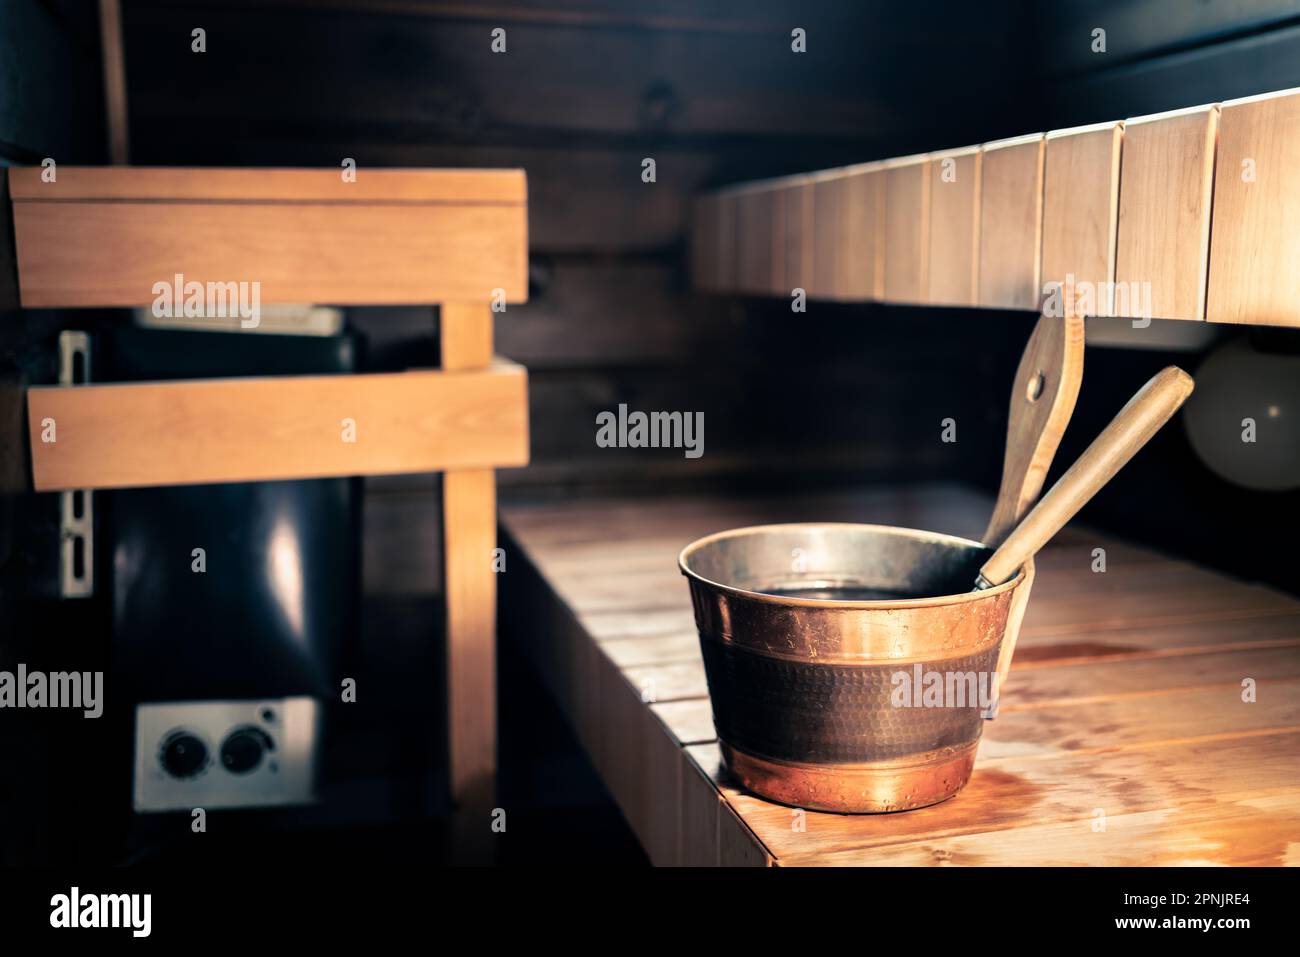 Sauna, spa wellness steam room in Finland. Wooden summer cabin interior. Electric stove in city home or hotel. Ladle and water bucket. Health bath. Stock Photo